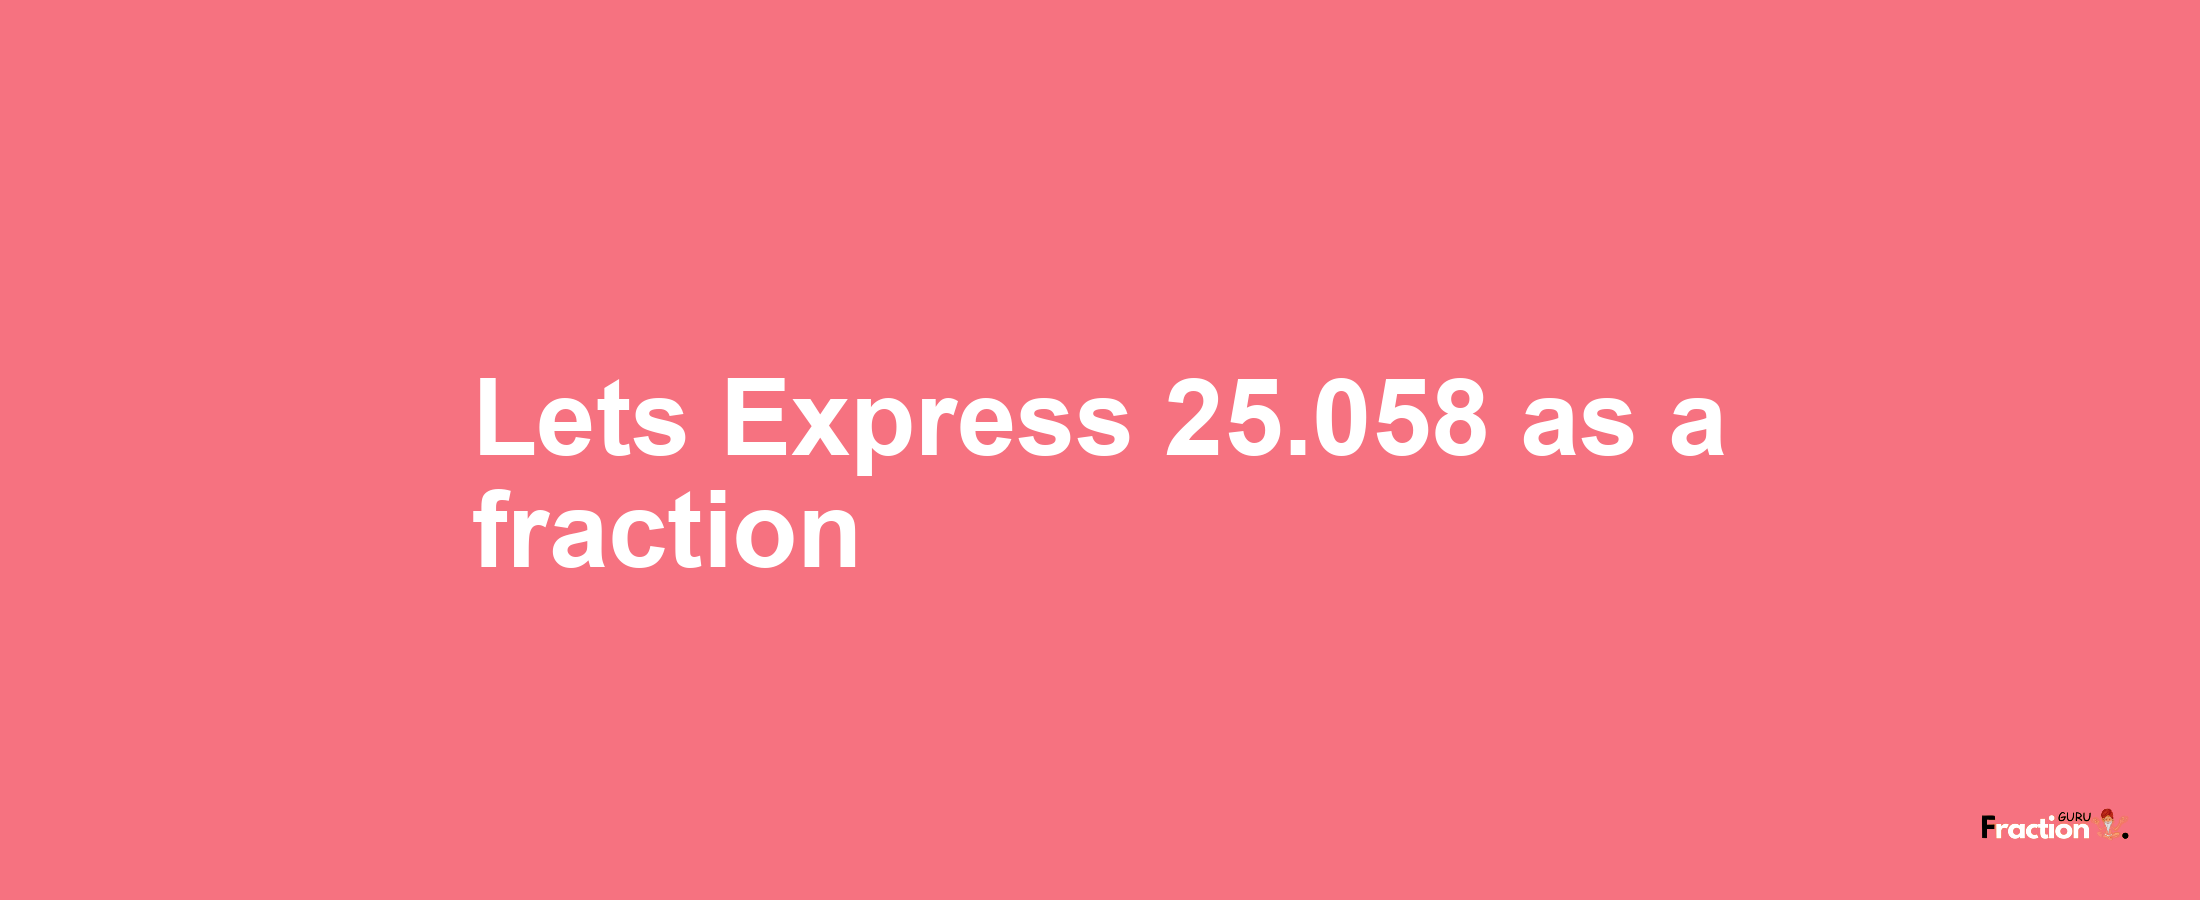 Lets Express 25.058 as afraction